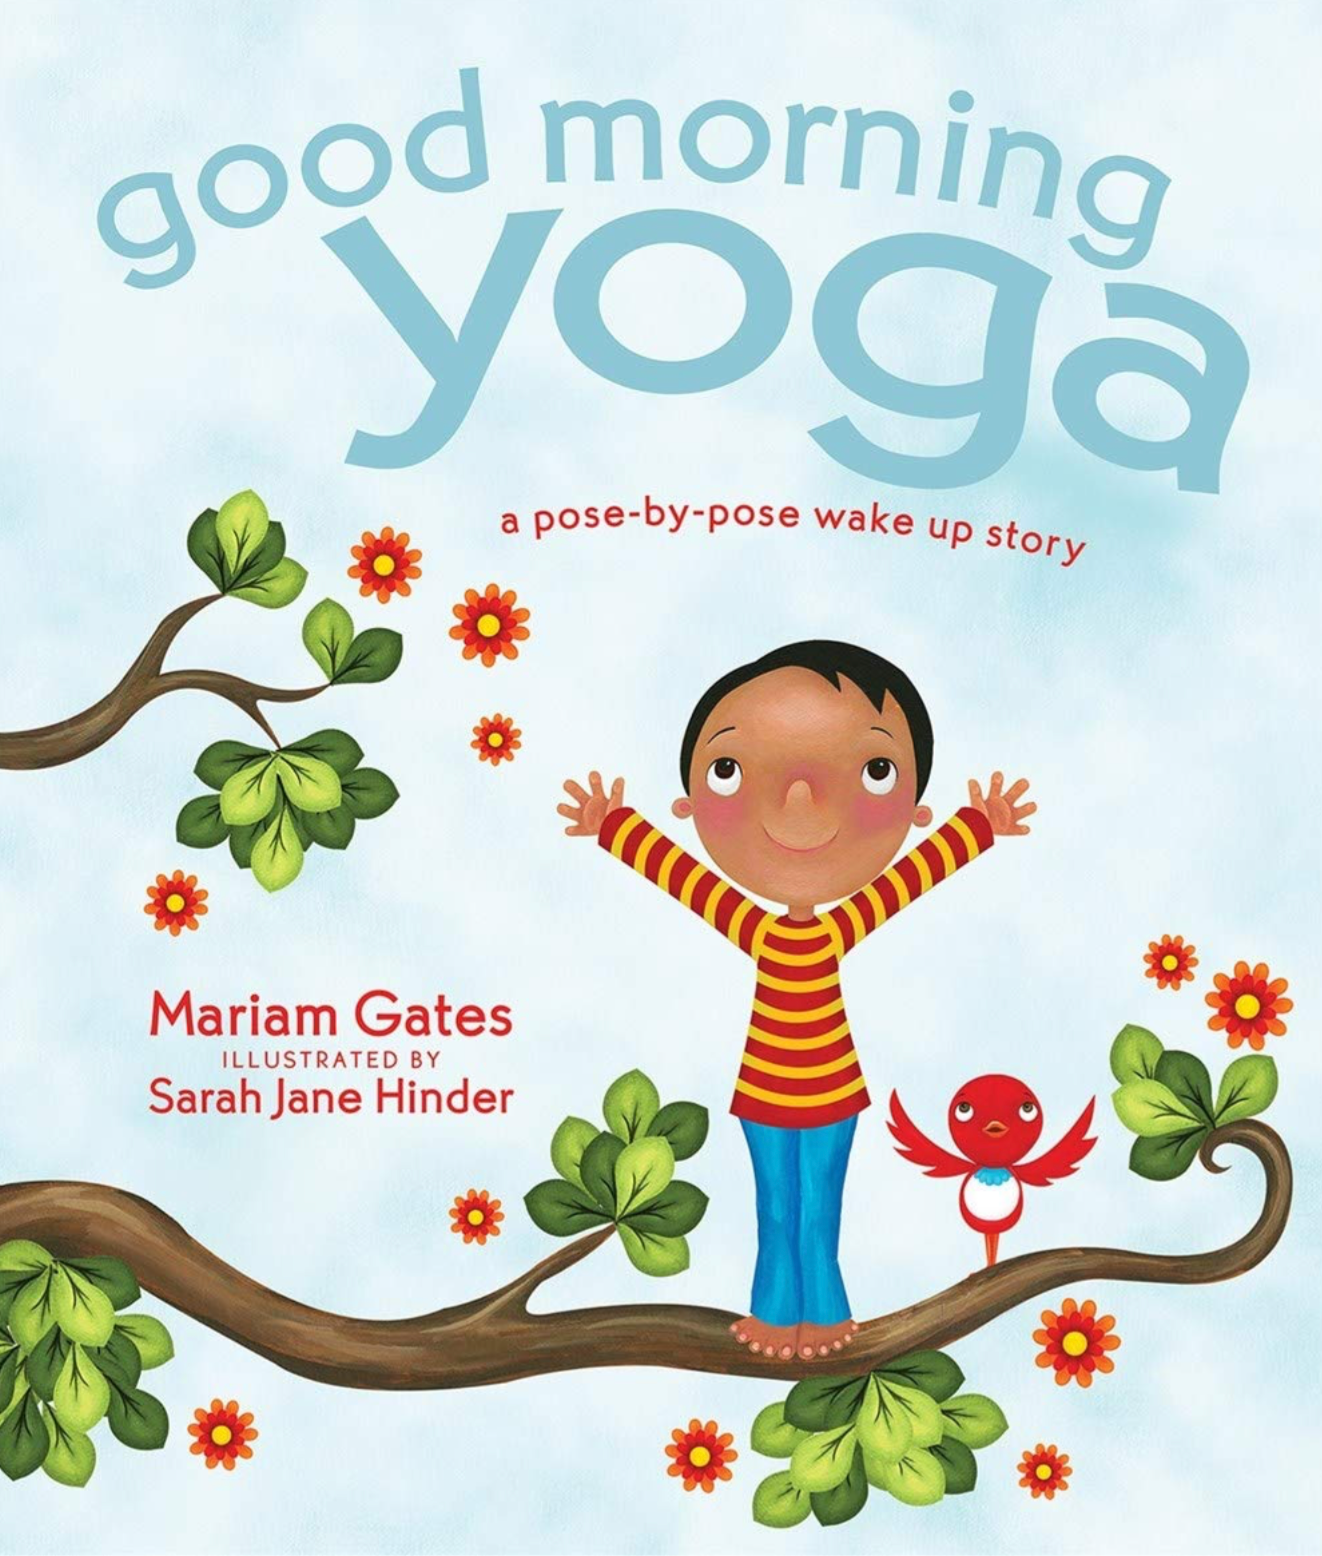 Good Morning Yoga: A Pose-by-Pose Wake-Up Story